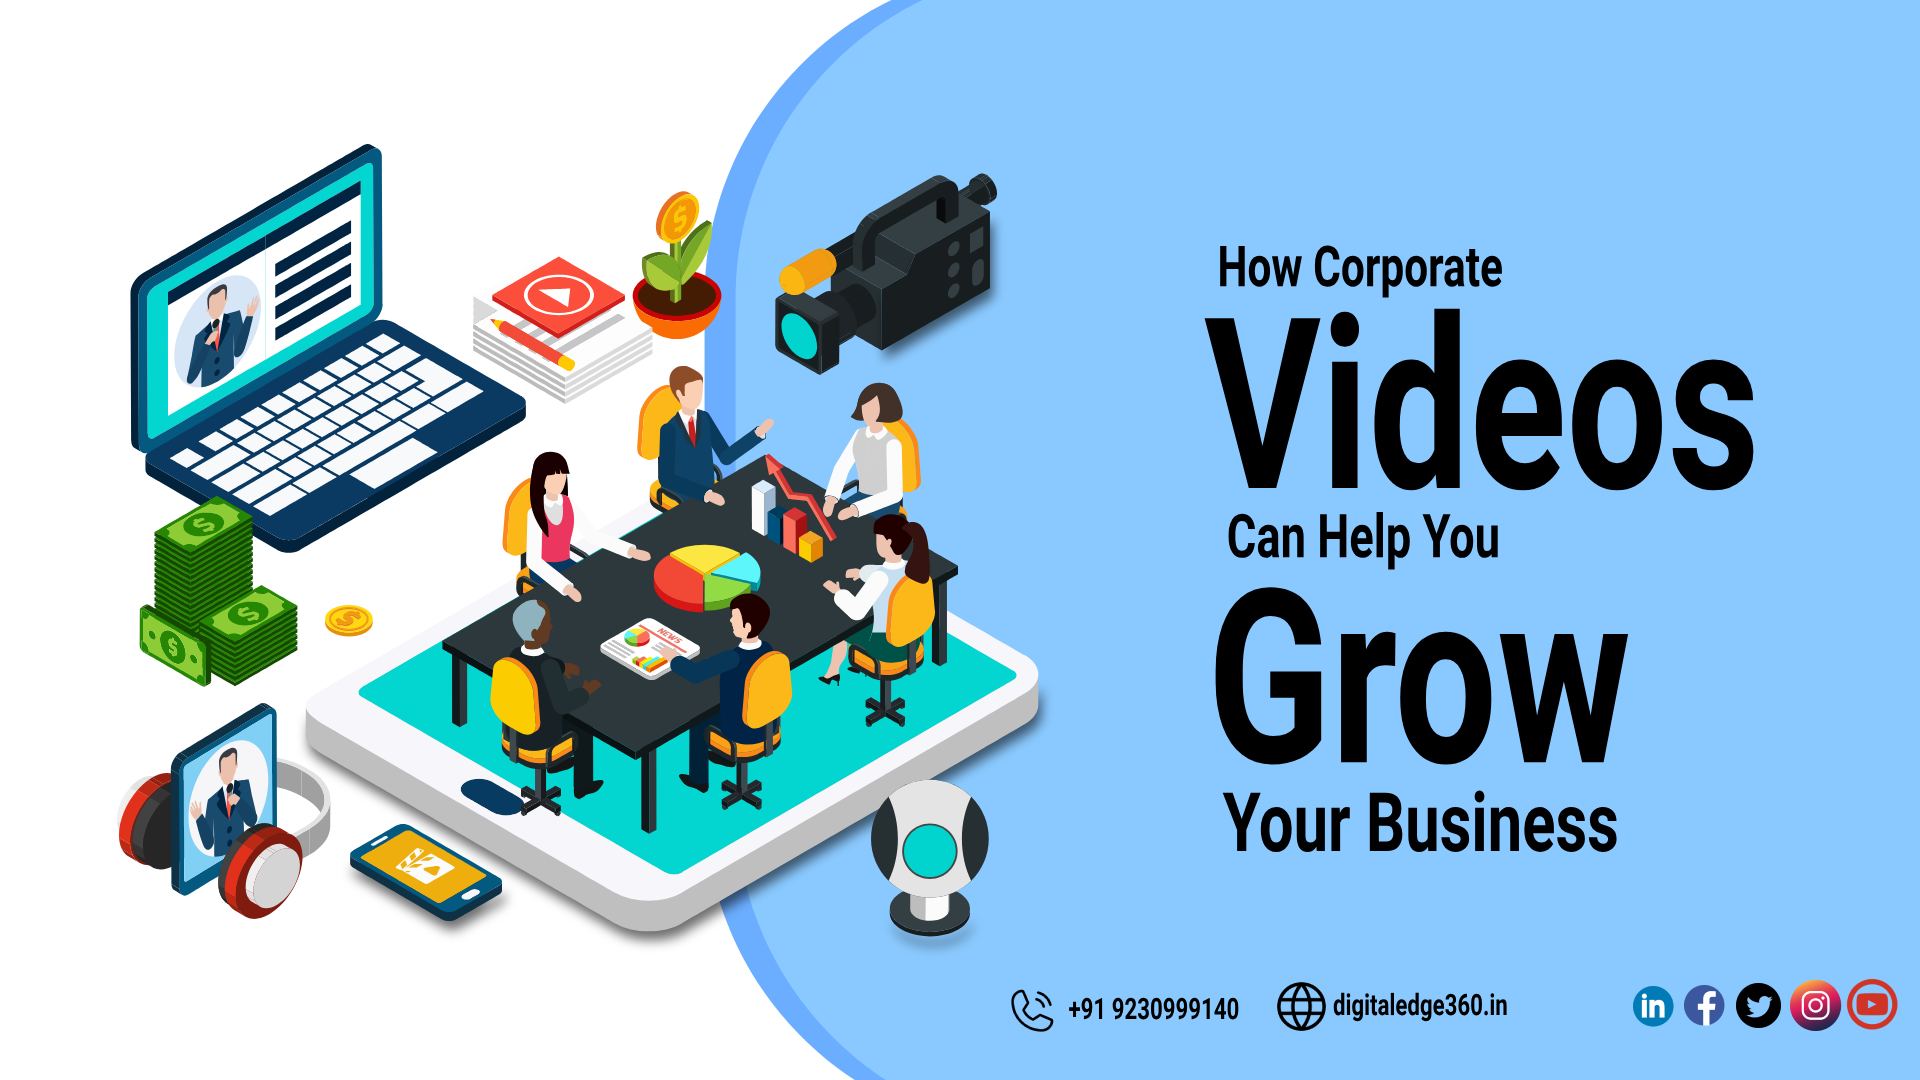 How Corporate Videos Can Help You Grow Your Business